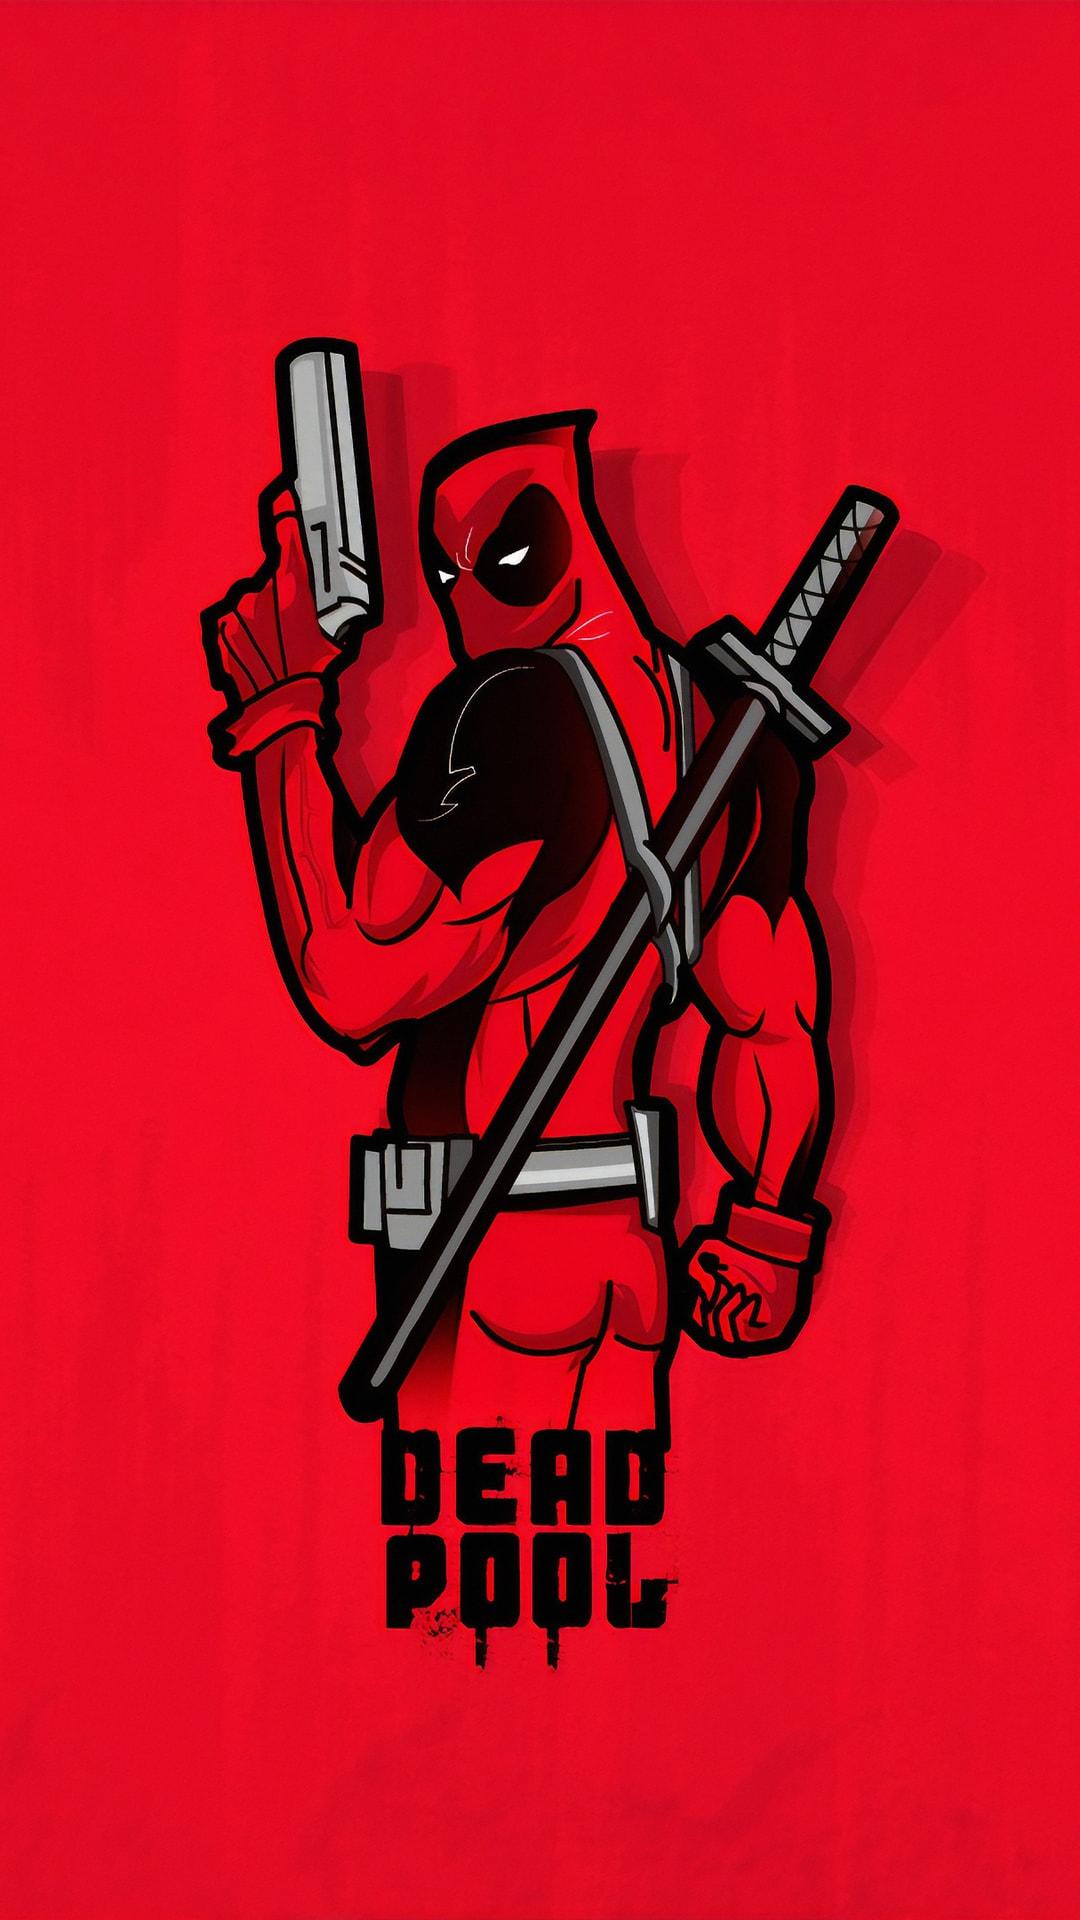 Deadpool 4k Minimal htc one wallpaper, free and easy to download